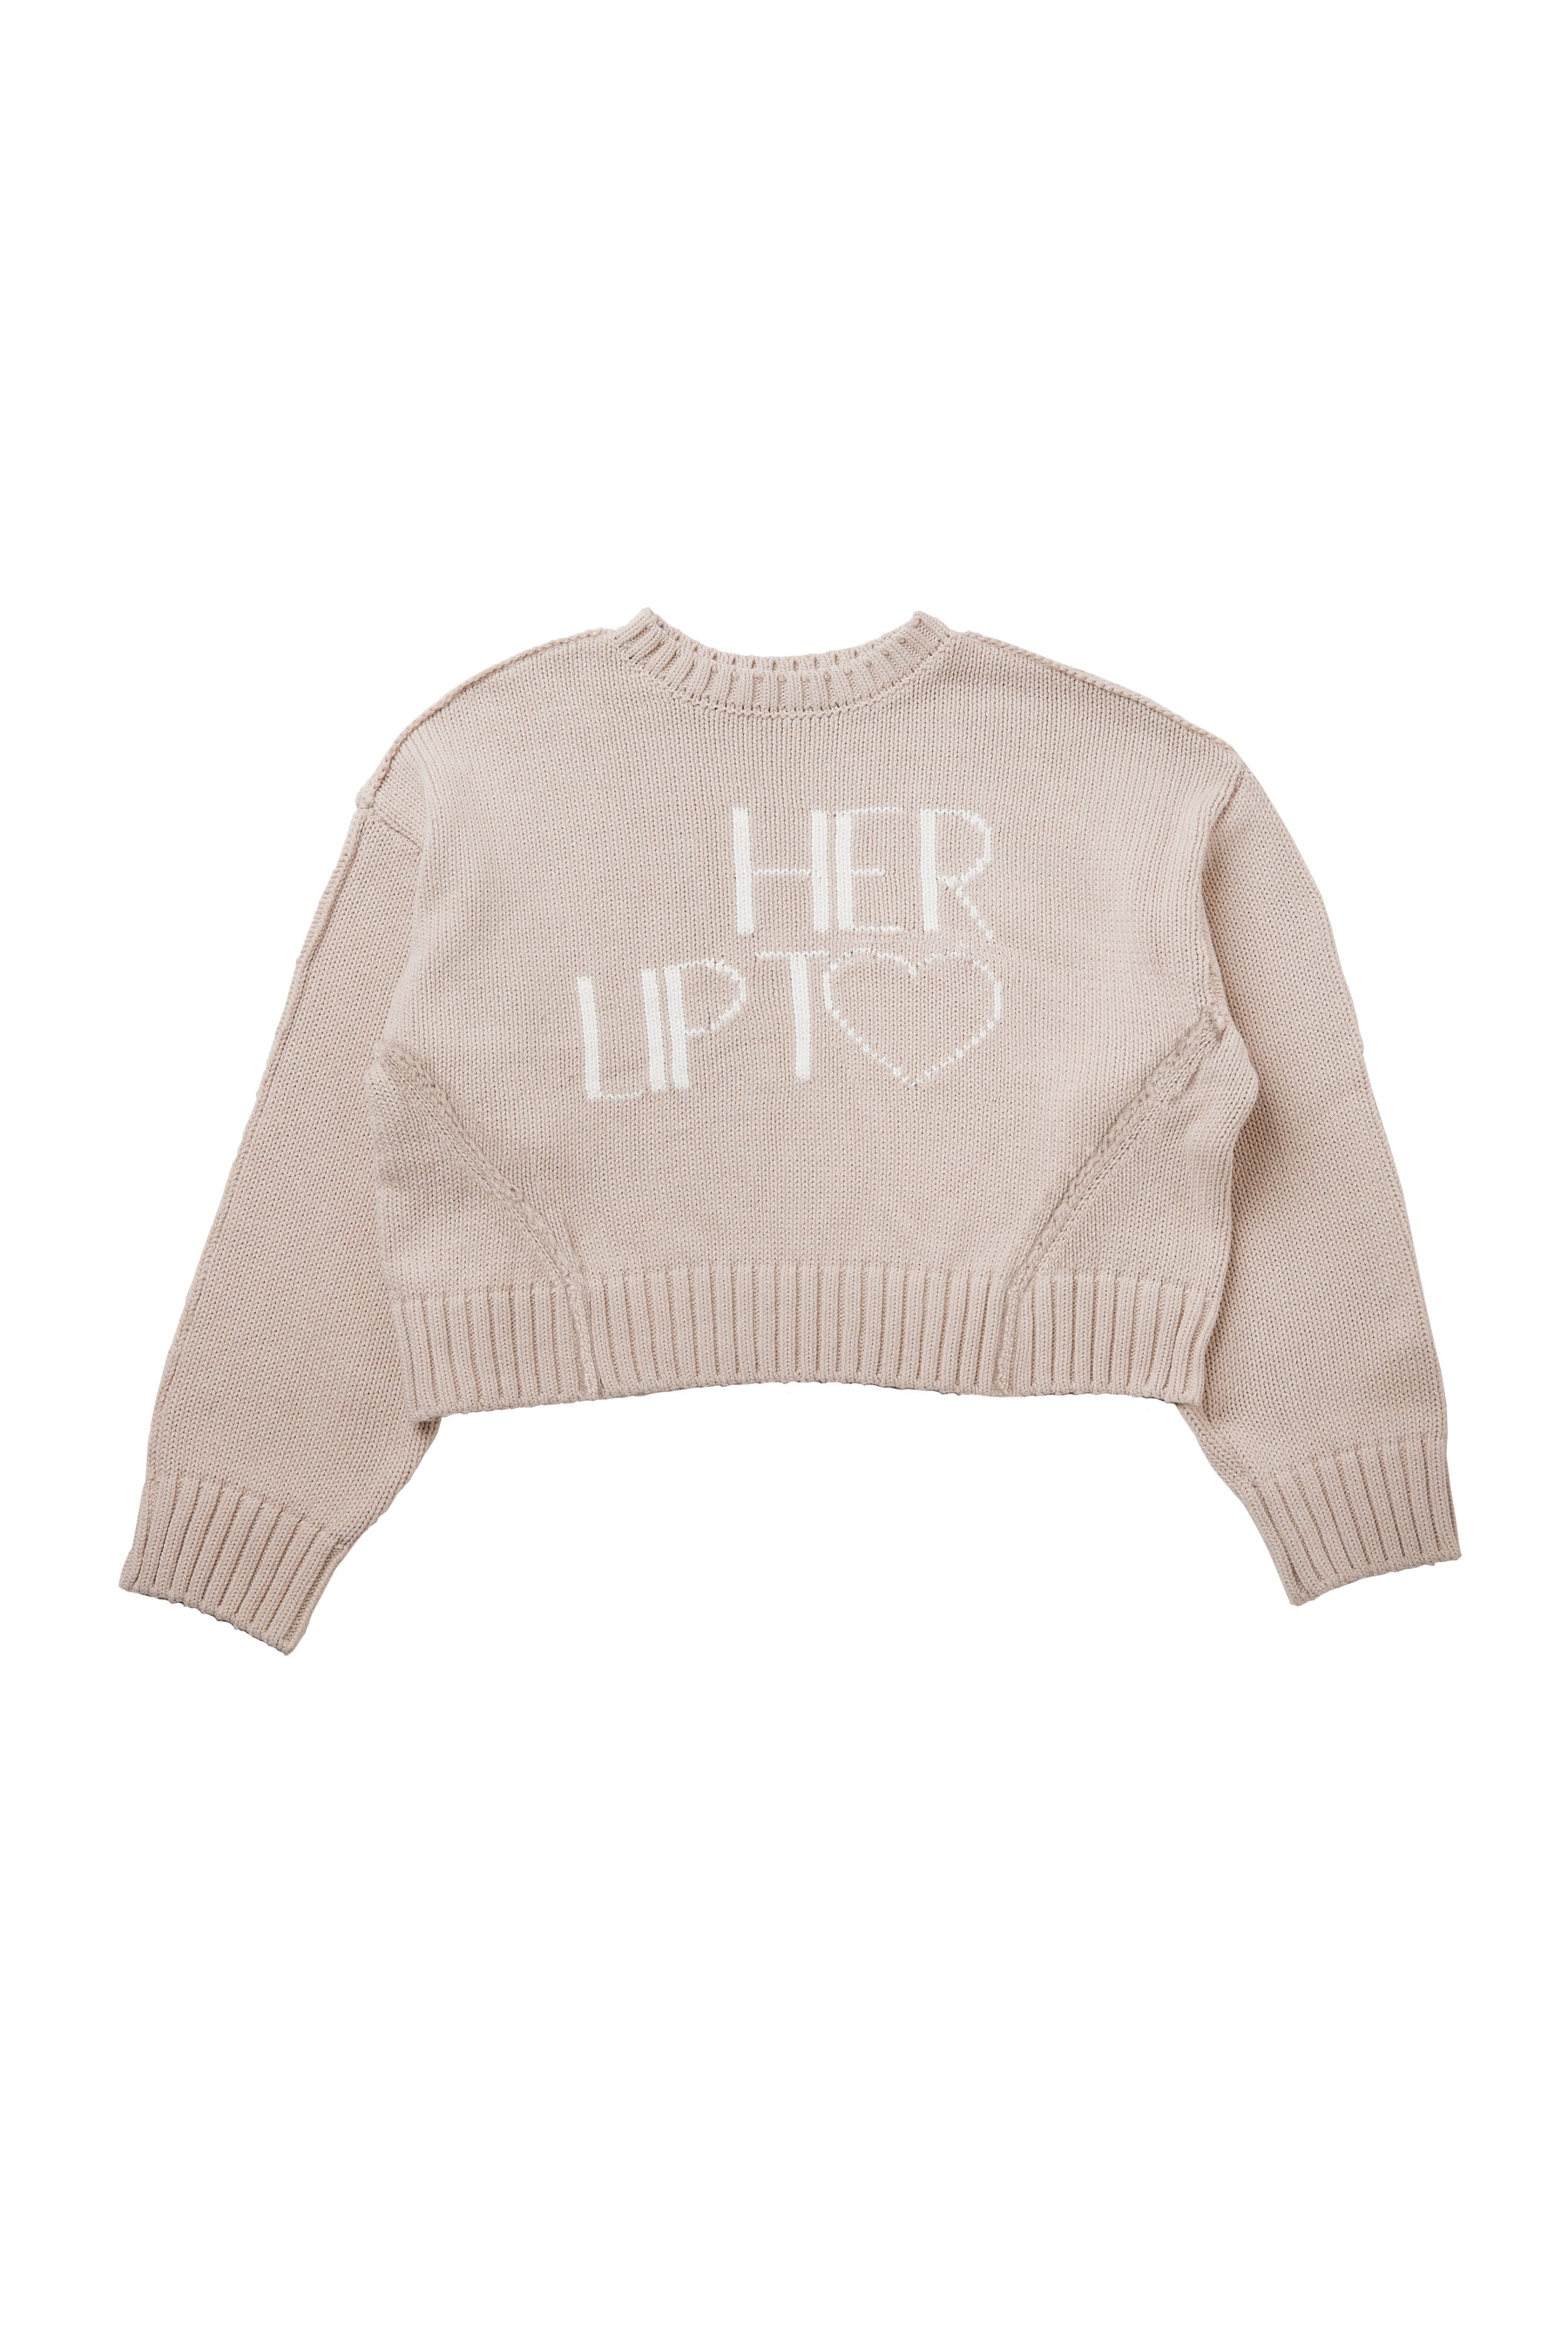 Her lip to Share The Love Knit Topコメント失礼いたします